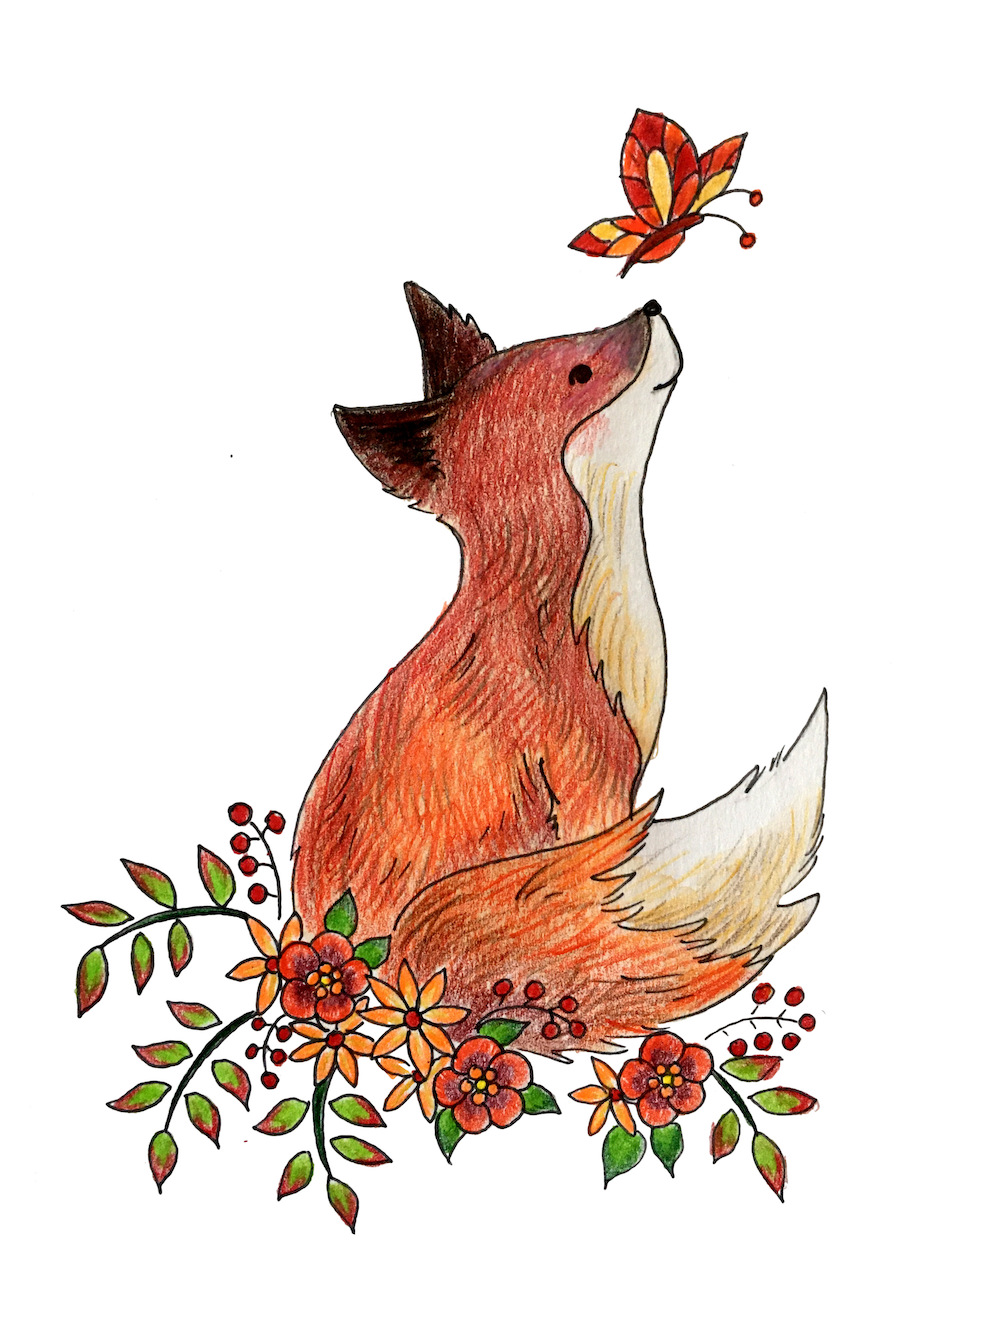 watercolor illustration by Kirsten McGonigal of a fox sitting in flowers with a butterfly flying above him